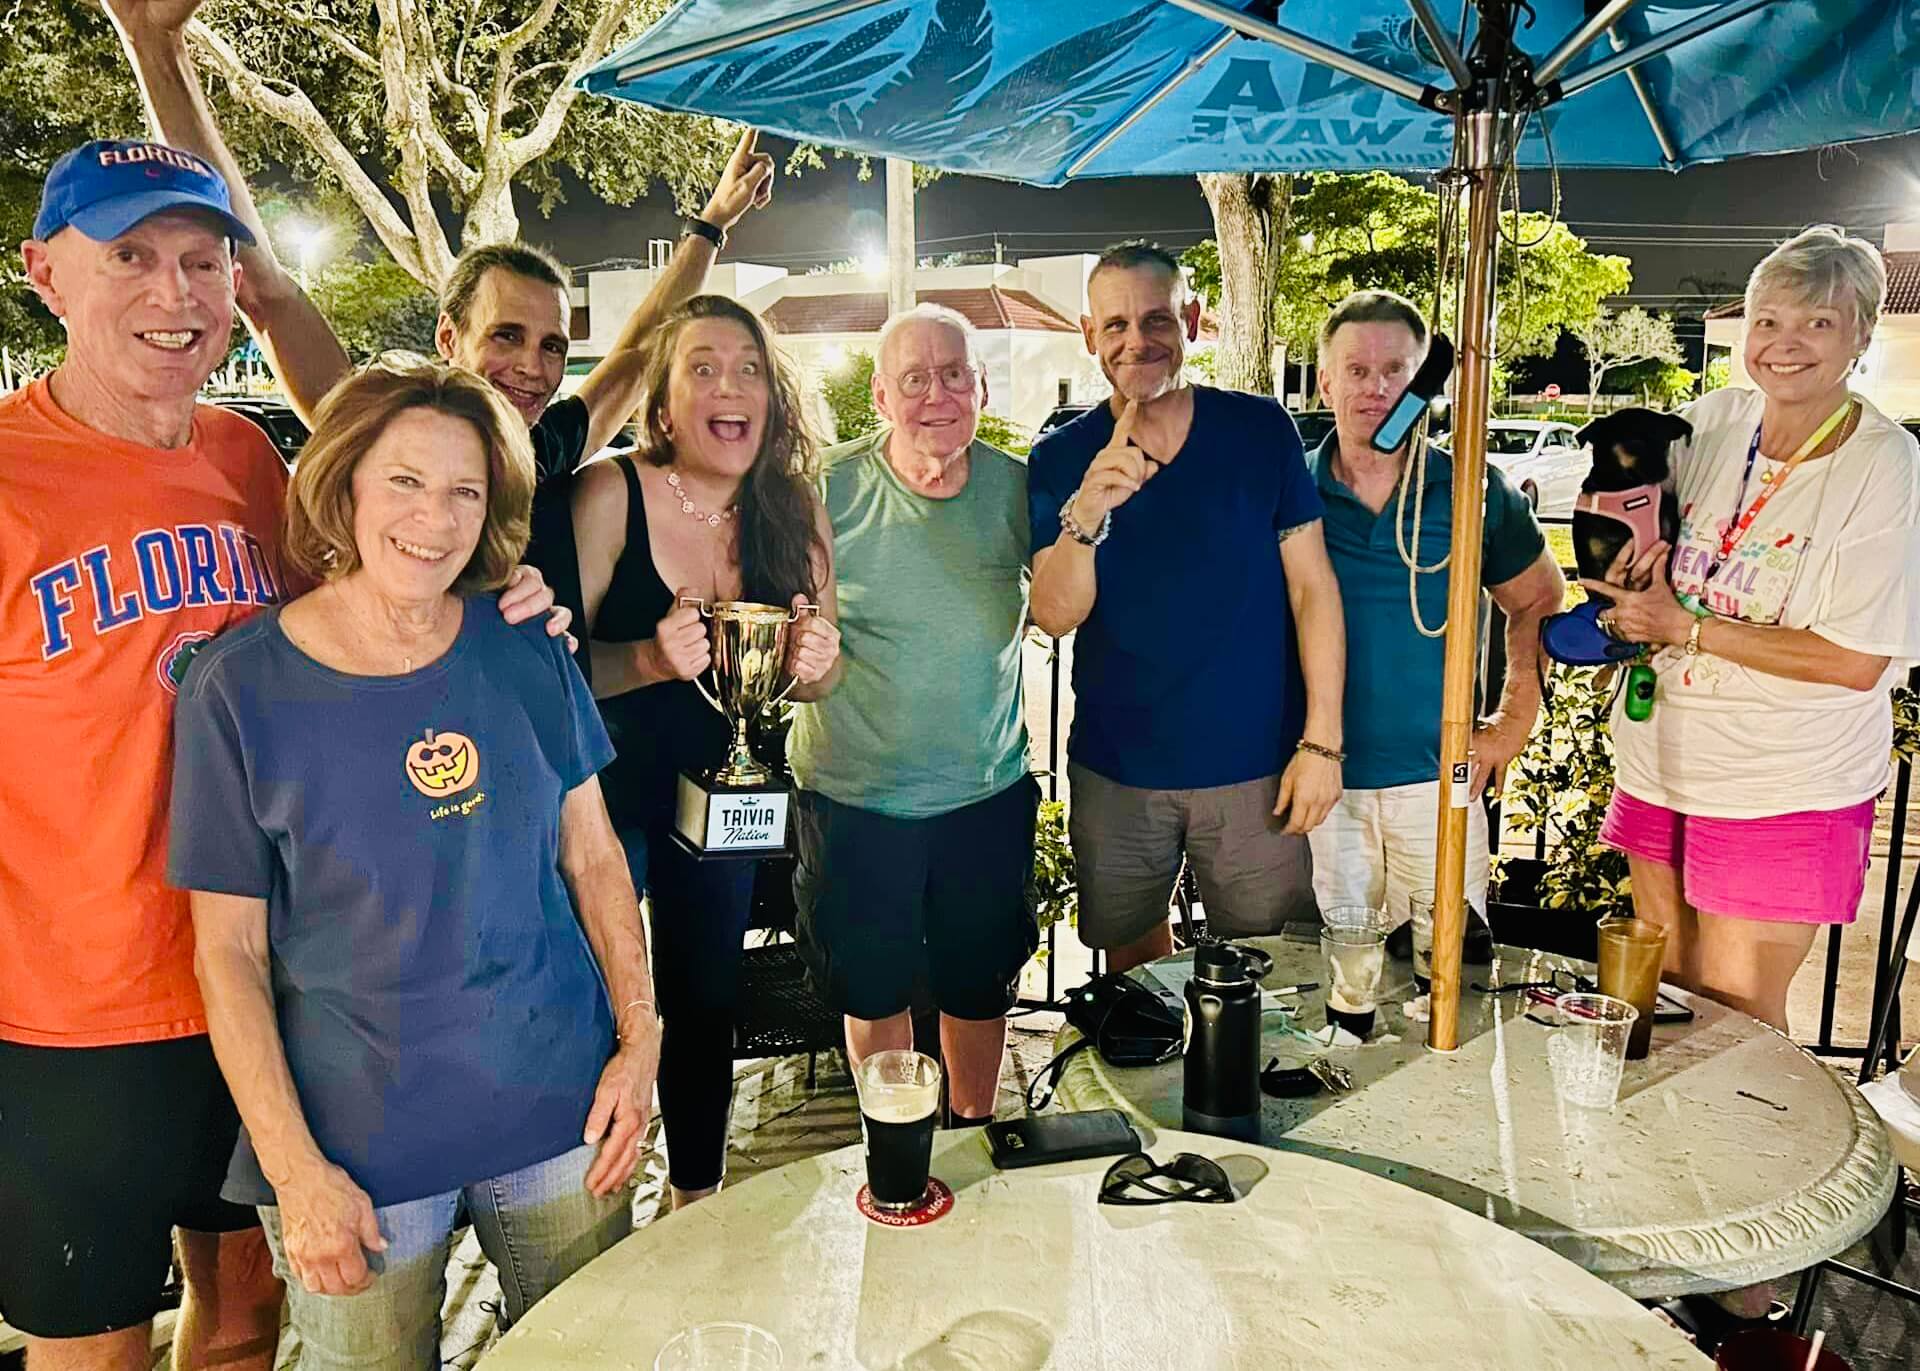 Sharkey's Bar & Grill Coral Springs FL 33065 trivia night: group of adults from middle-aged to older standing outside together smiling with a woman making an excited face and holding a Trivia Nation trophy while another woman holds up a dog